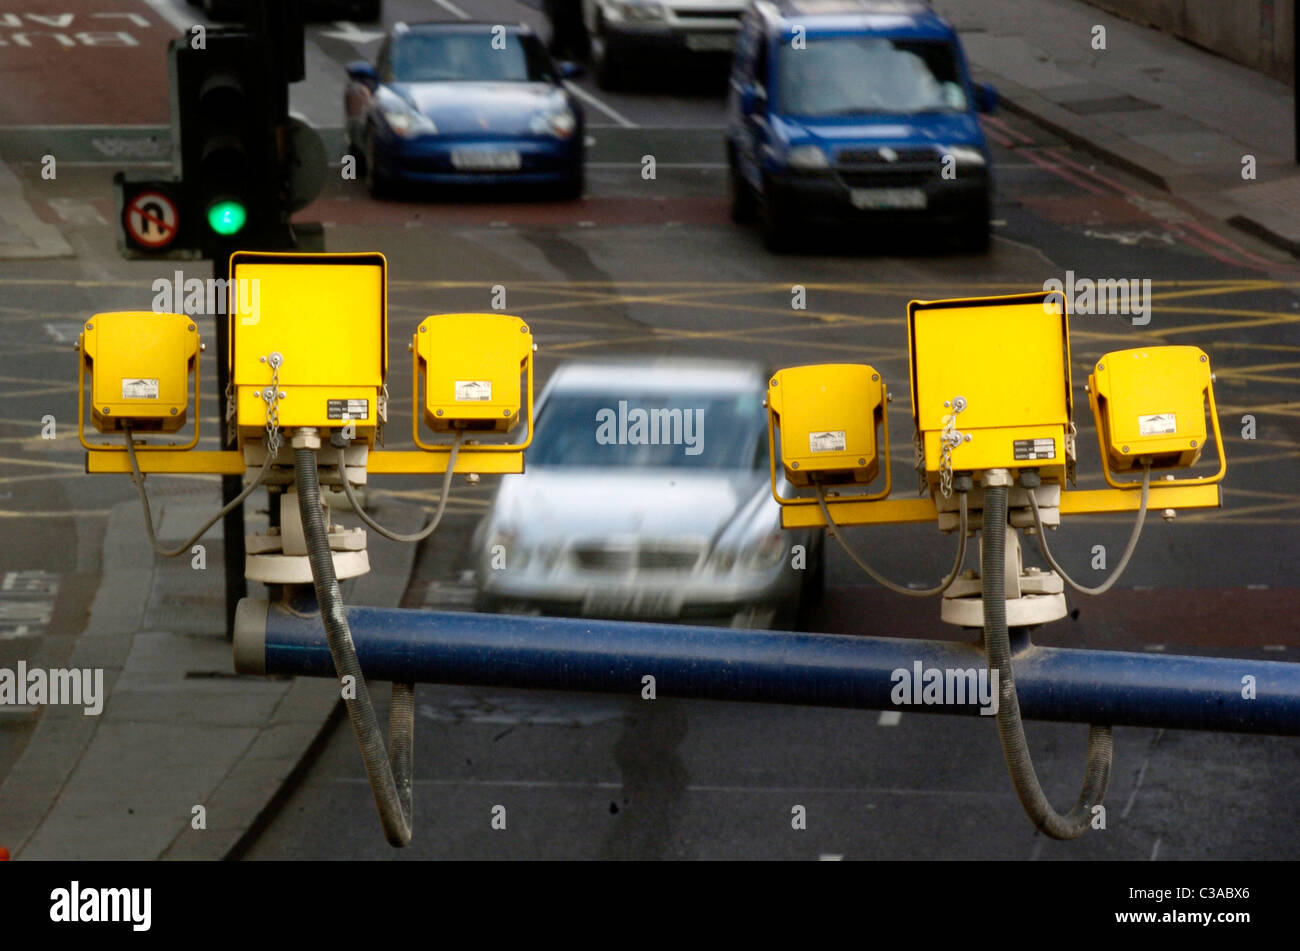 Speed cameras monitoring the traffic Stock Photo